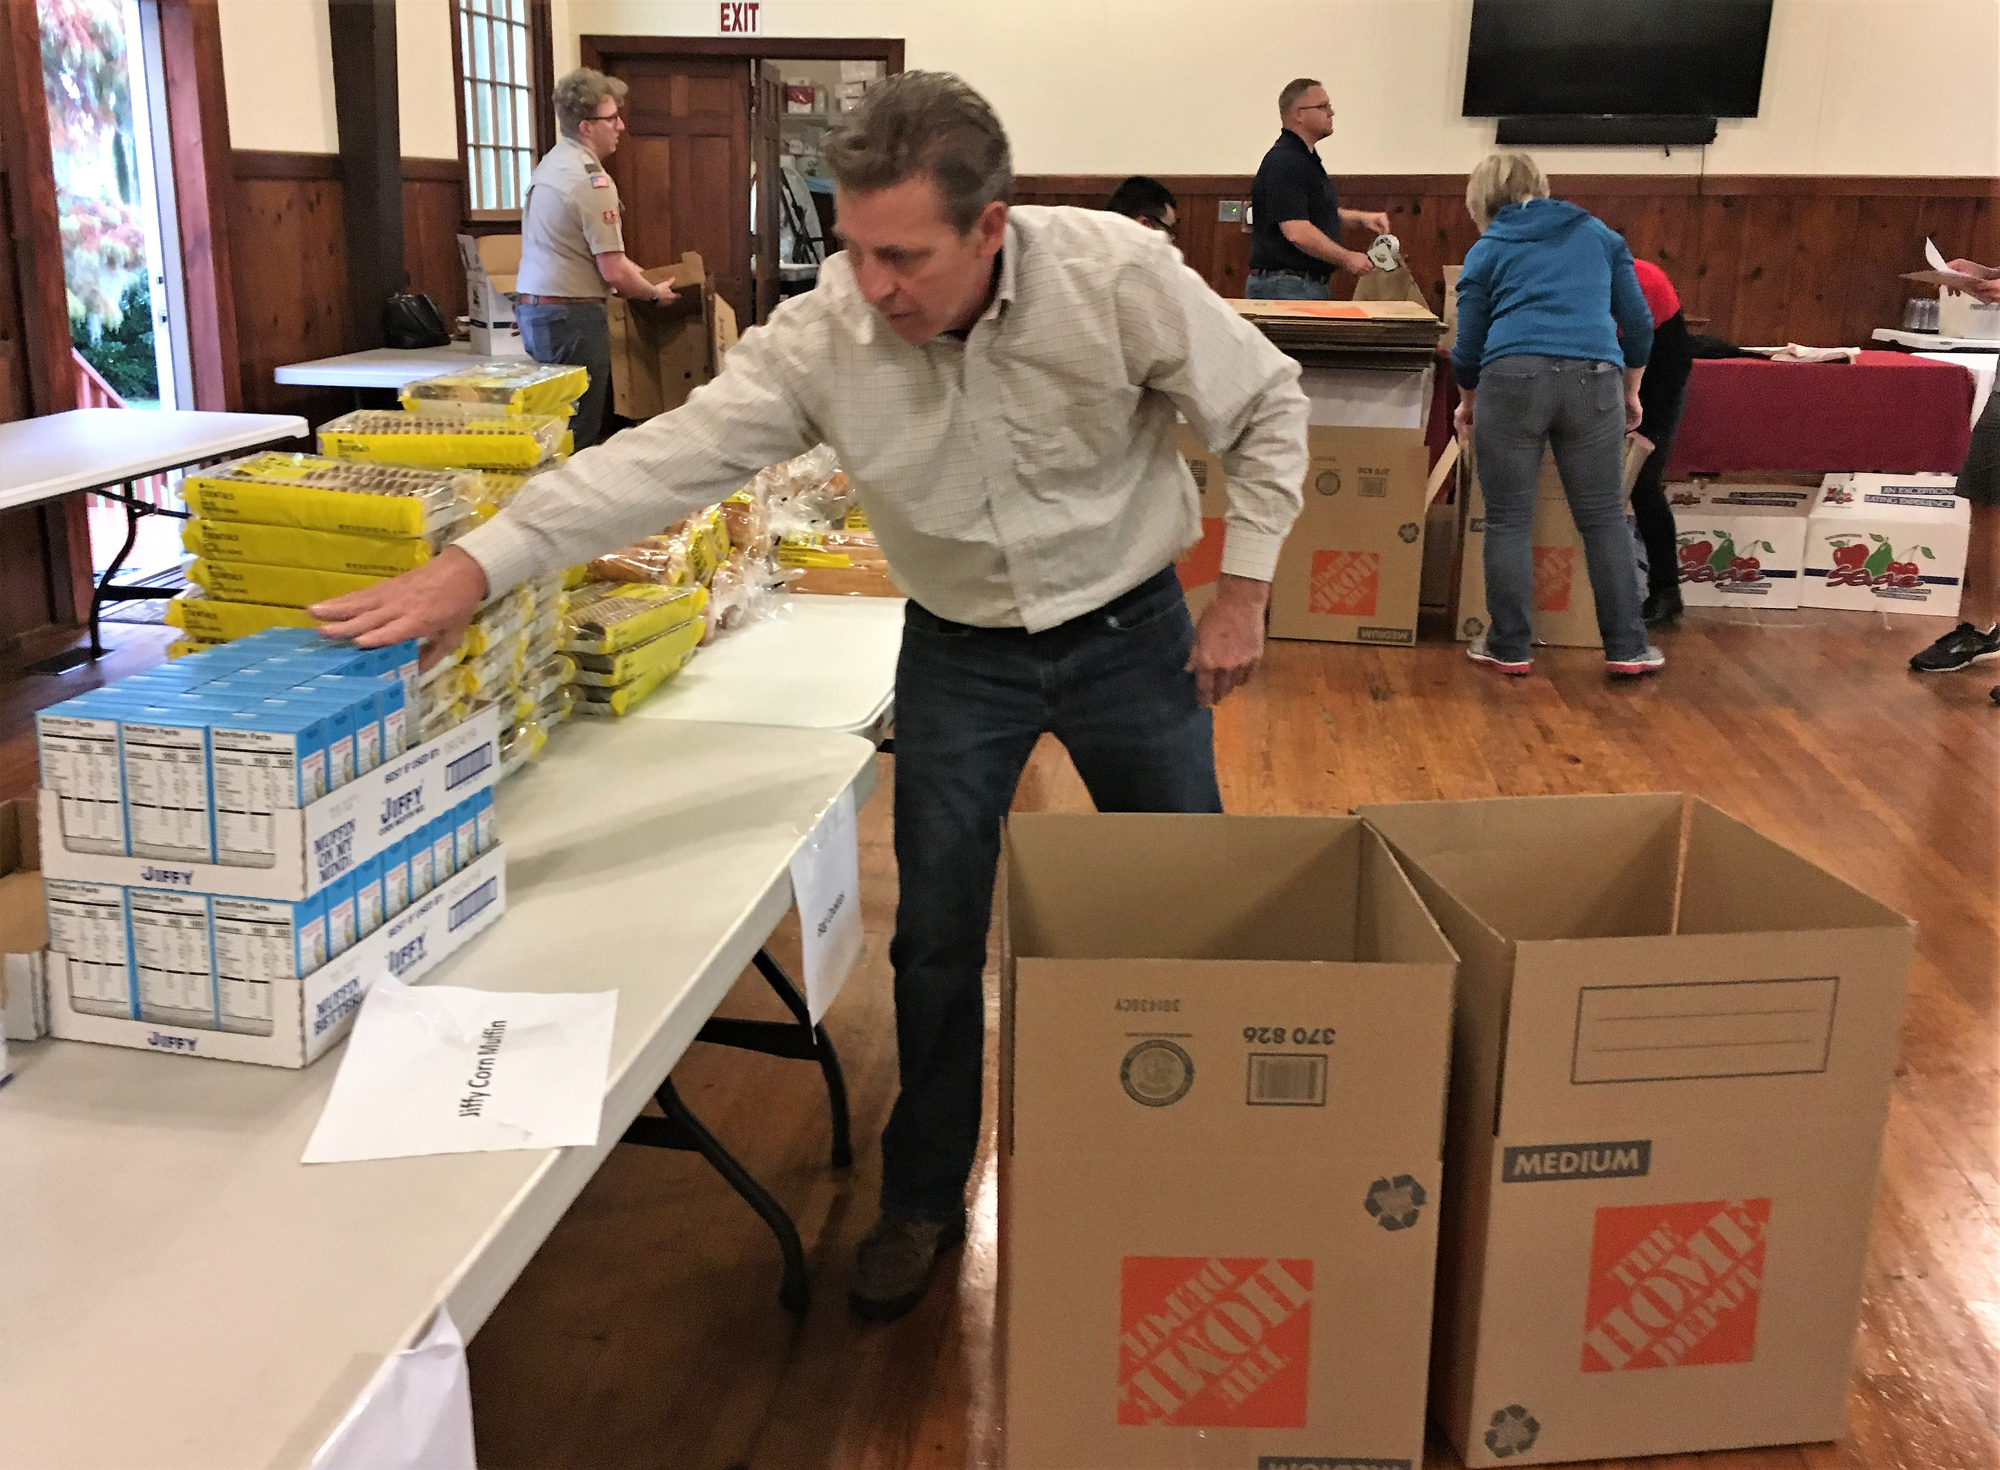 Bill Garrison, executive officer of the Northeast Florida Builders Association, helps pack food boxes that were part of the holiday dinner giveaway at St. Mary’s Church in Green Cove Springs.